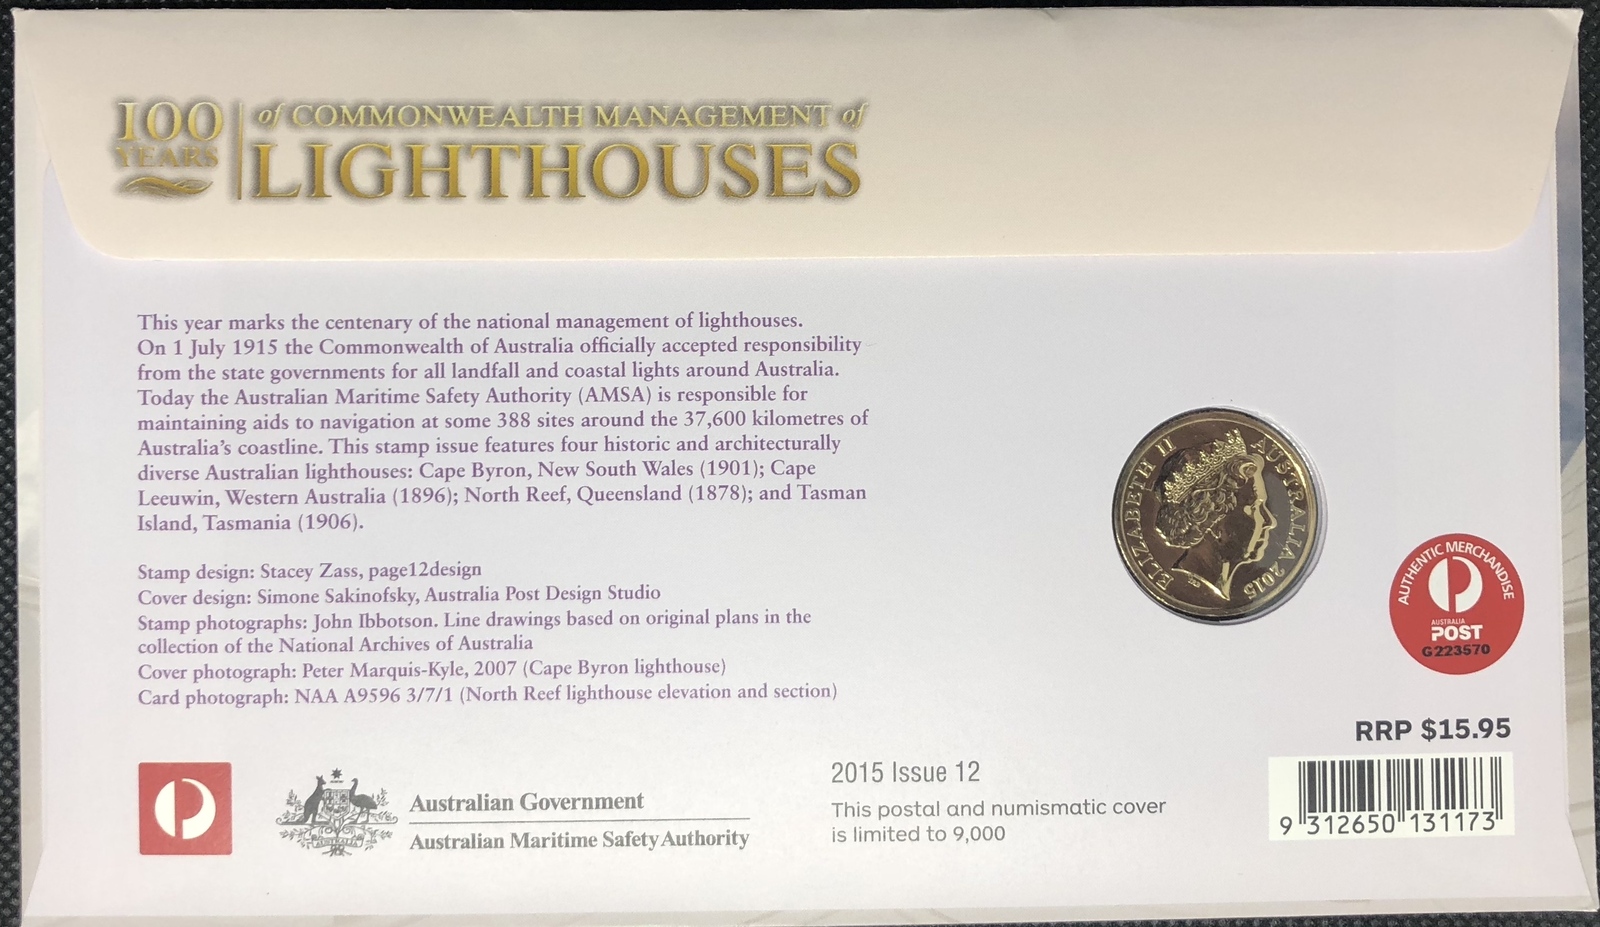 2015 PNC 100 Years of Commonwealth Management of Lighthouses 